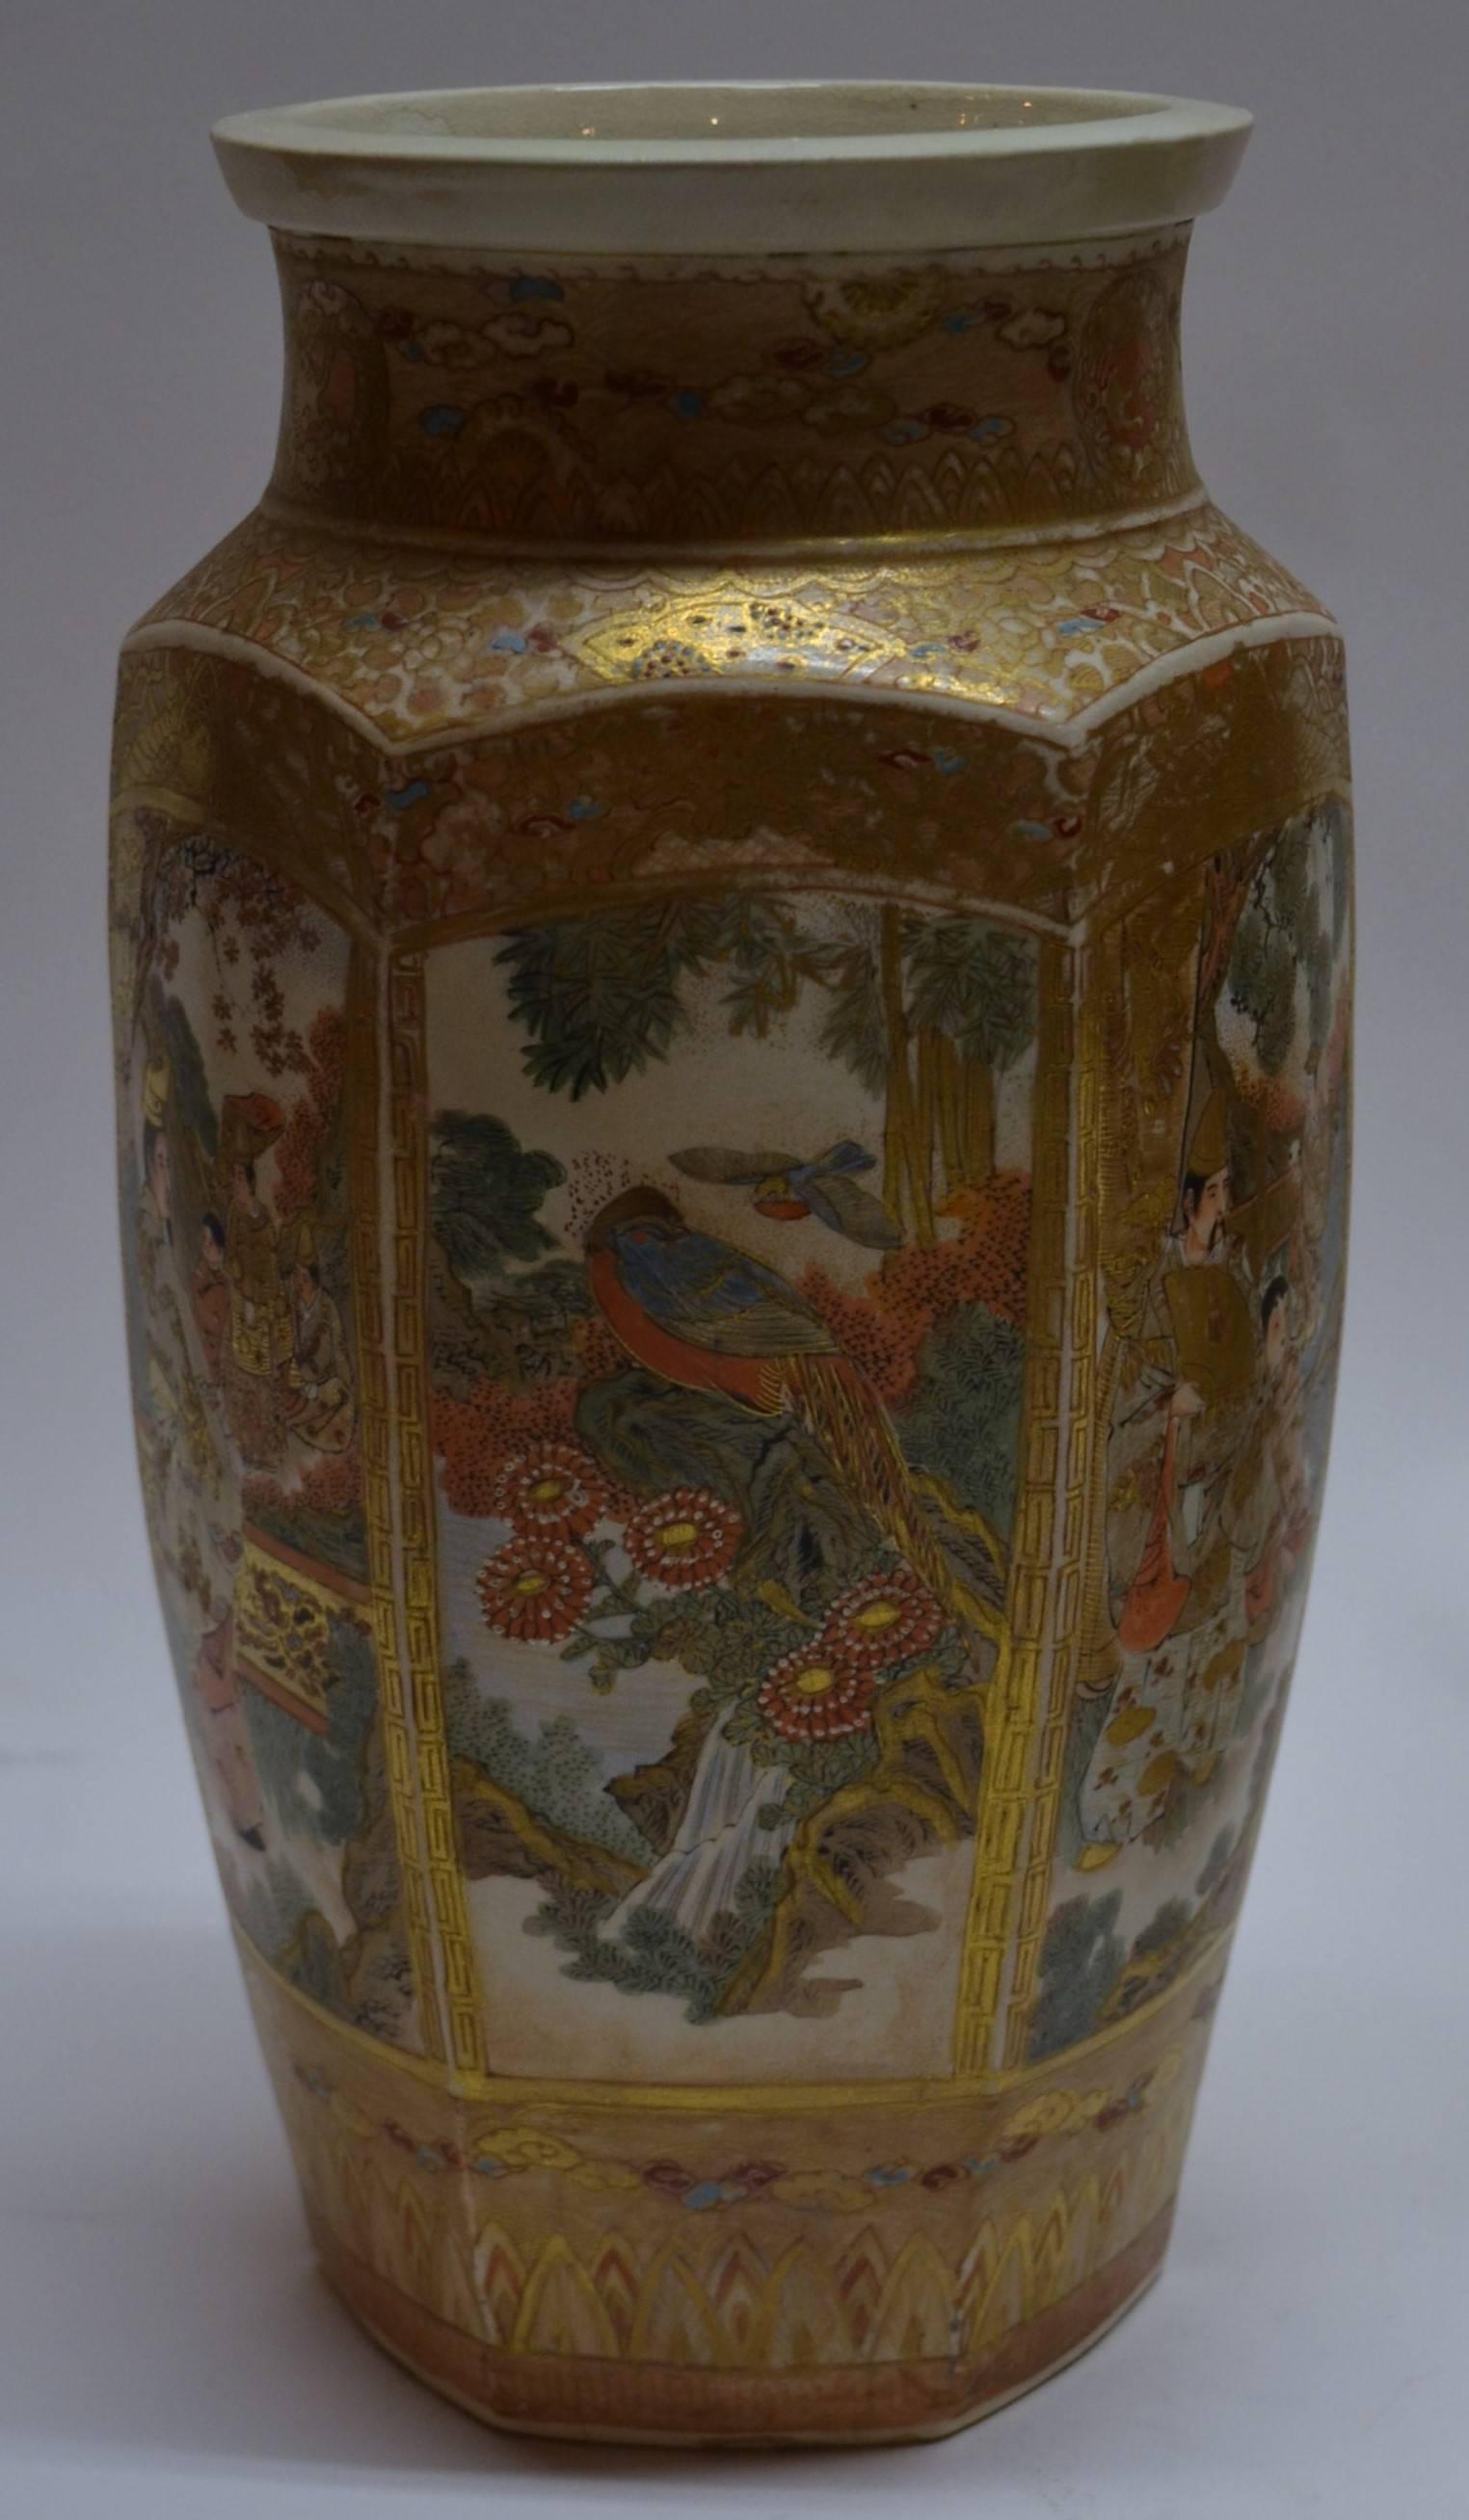 Pair of antique Japanese gold and multicolored satsuma porcelain vases, circa 1880-1890.